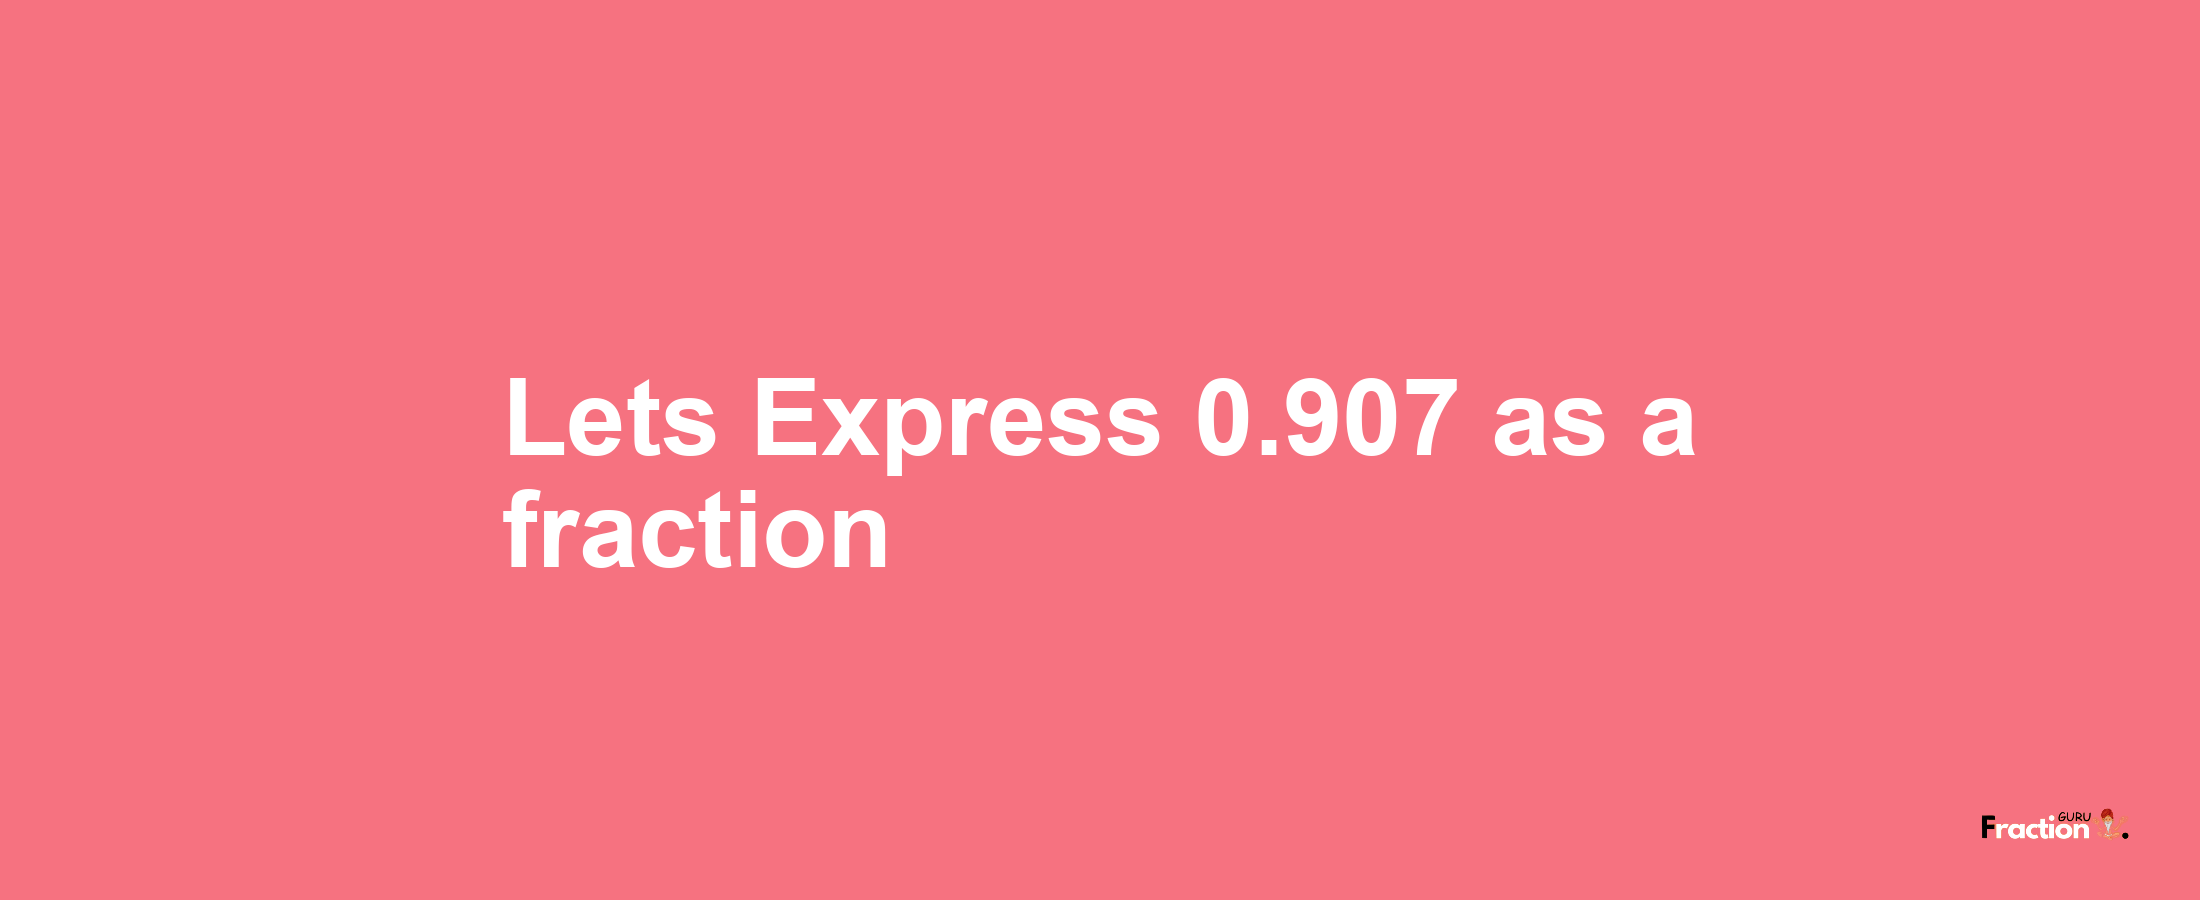 Lets Express 0.907 as afraction